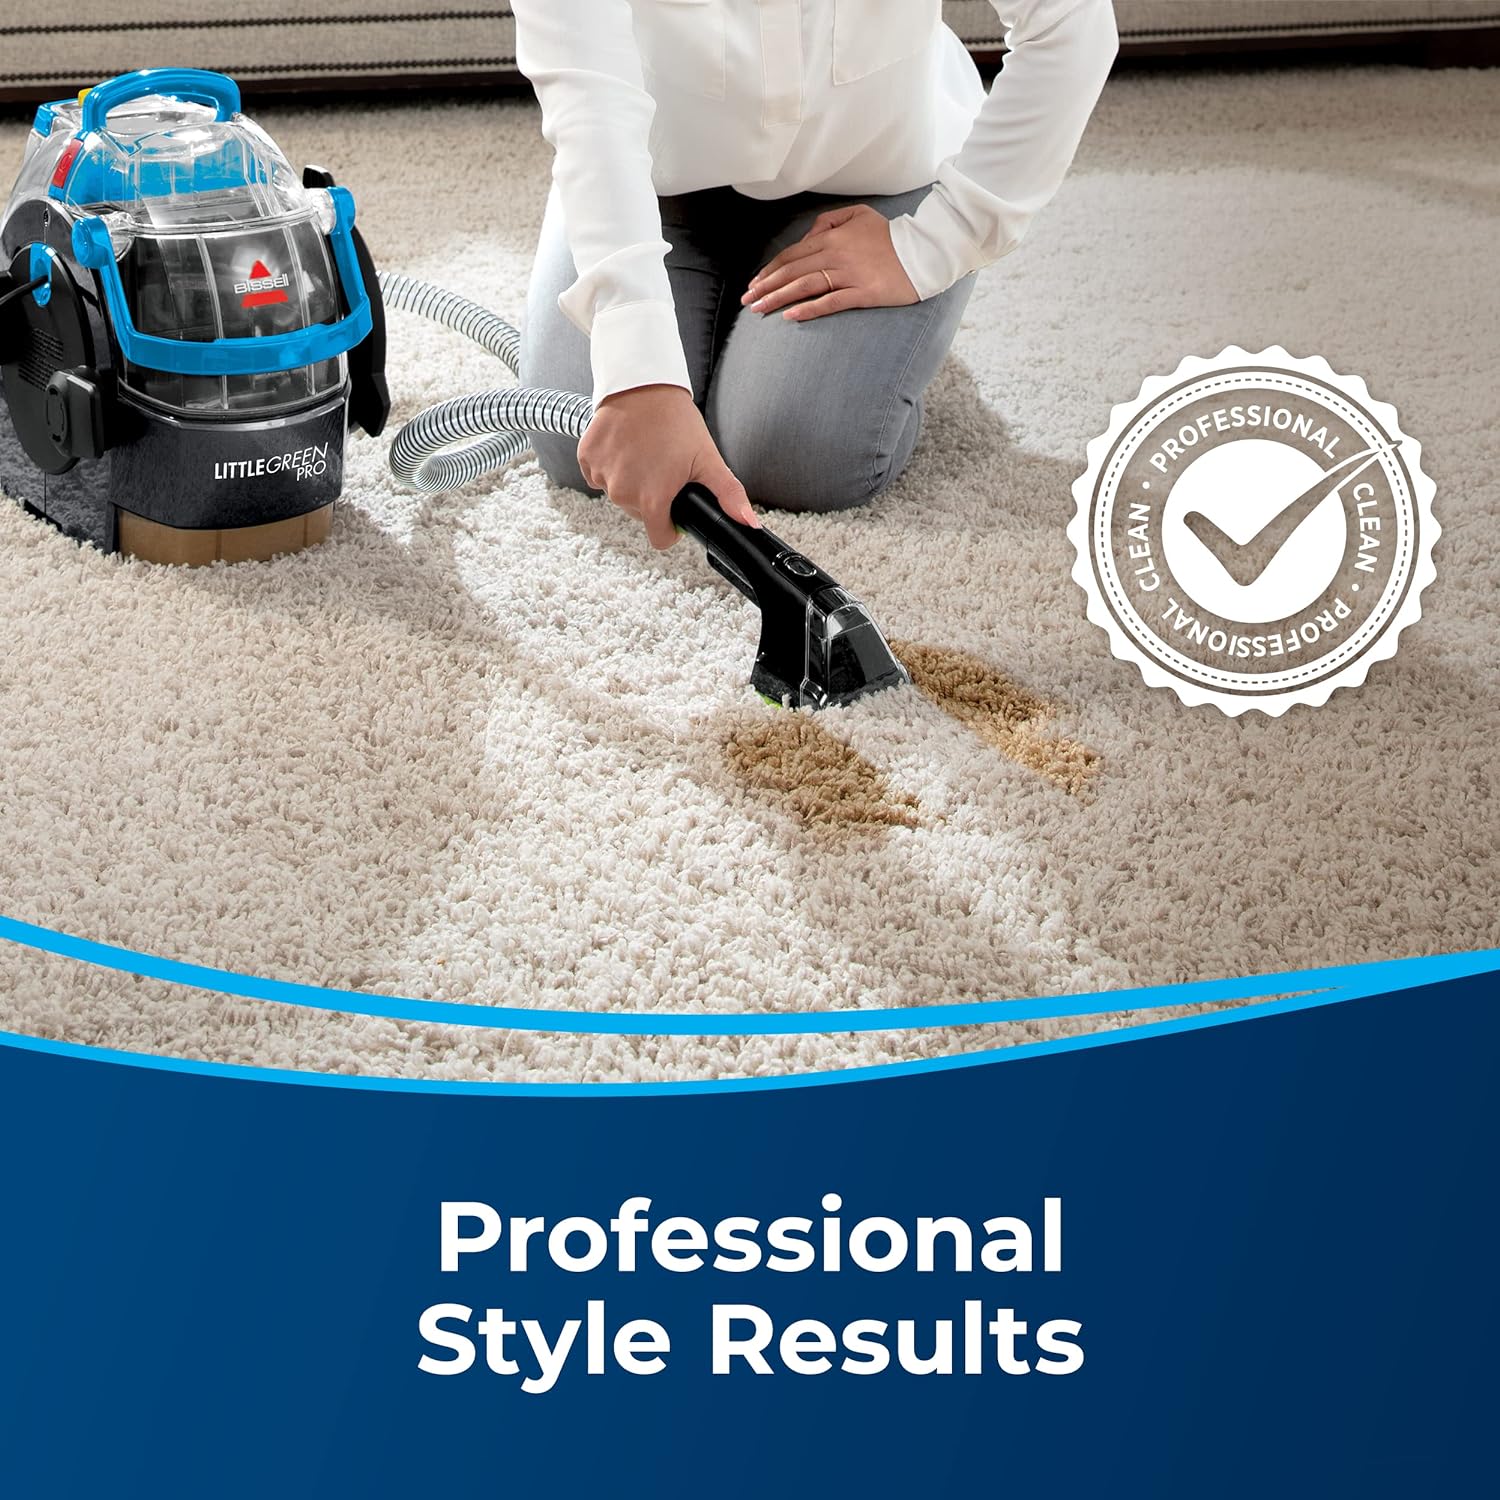 BISSELL Little Green Pro Carpet Cleaner Review